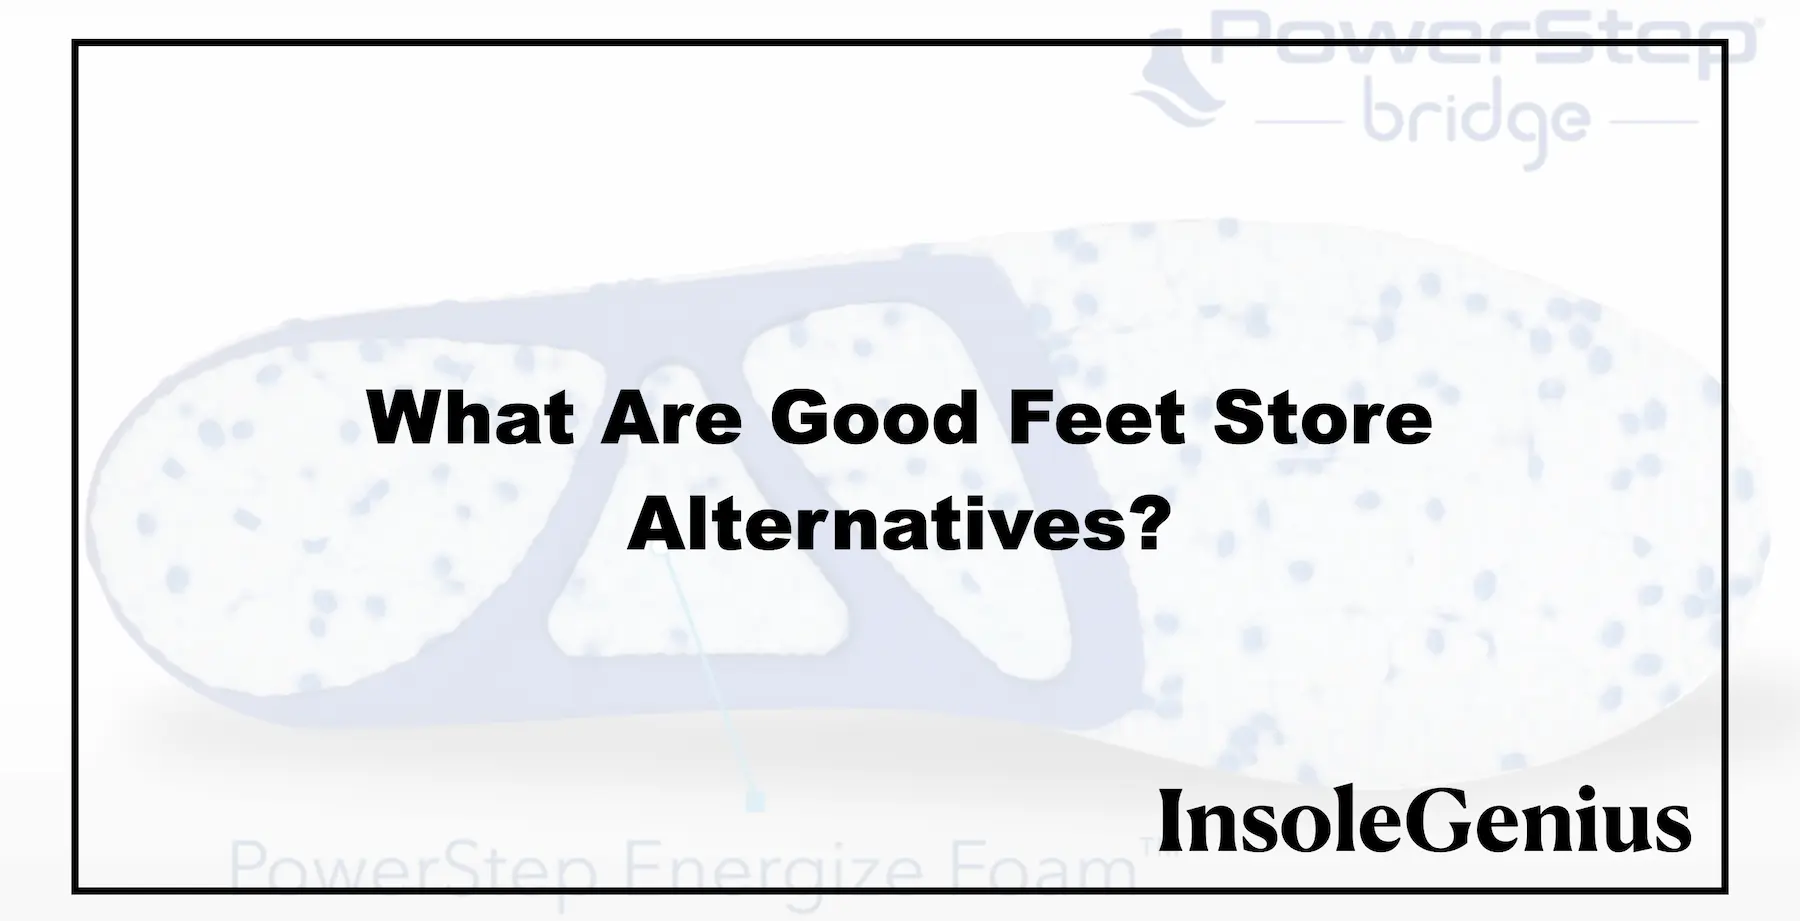 what are the good feet store alternatives for insoles and shoes